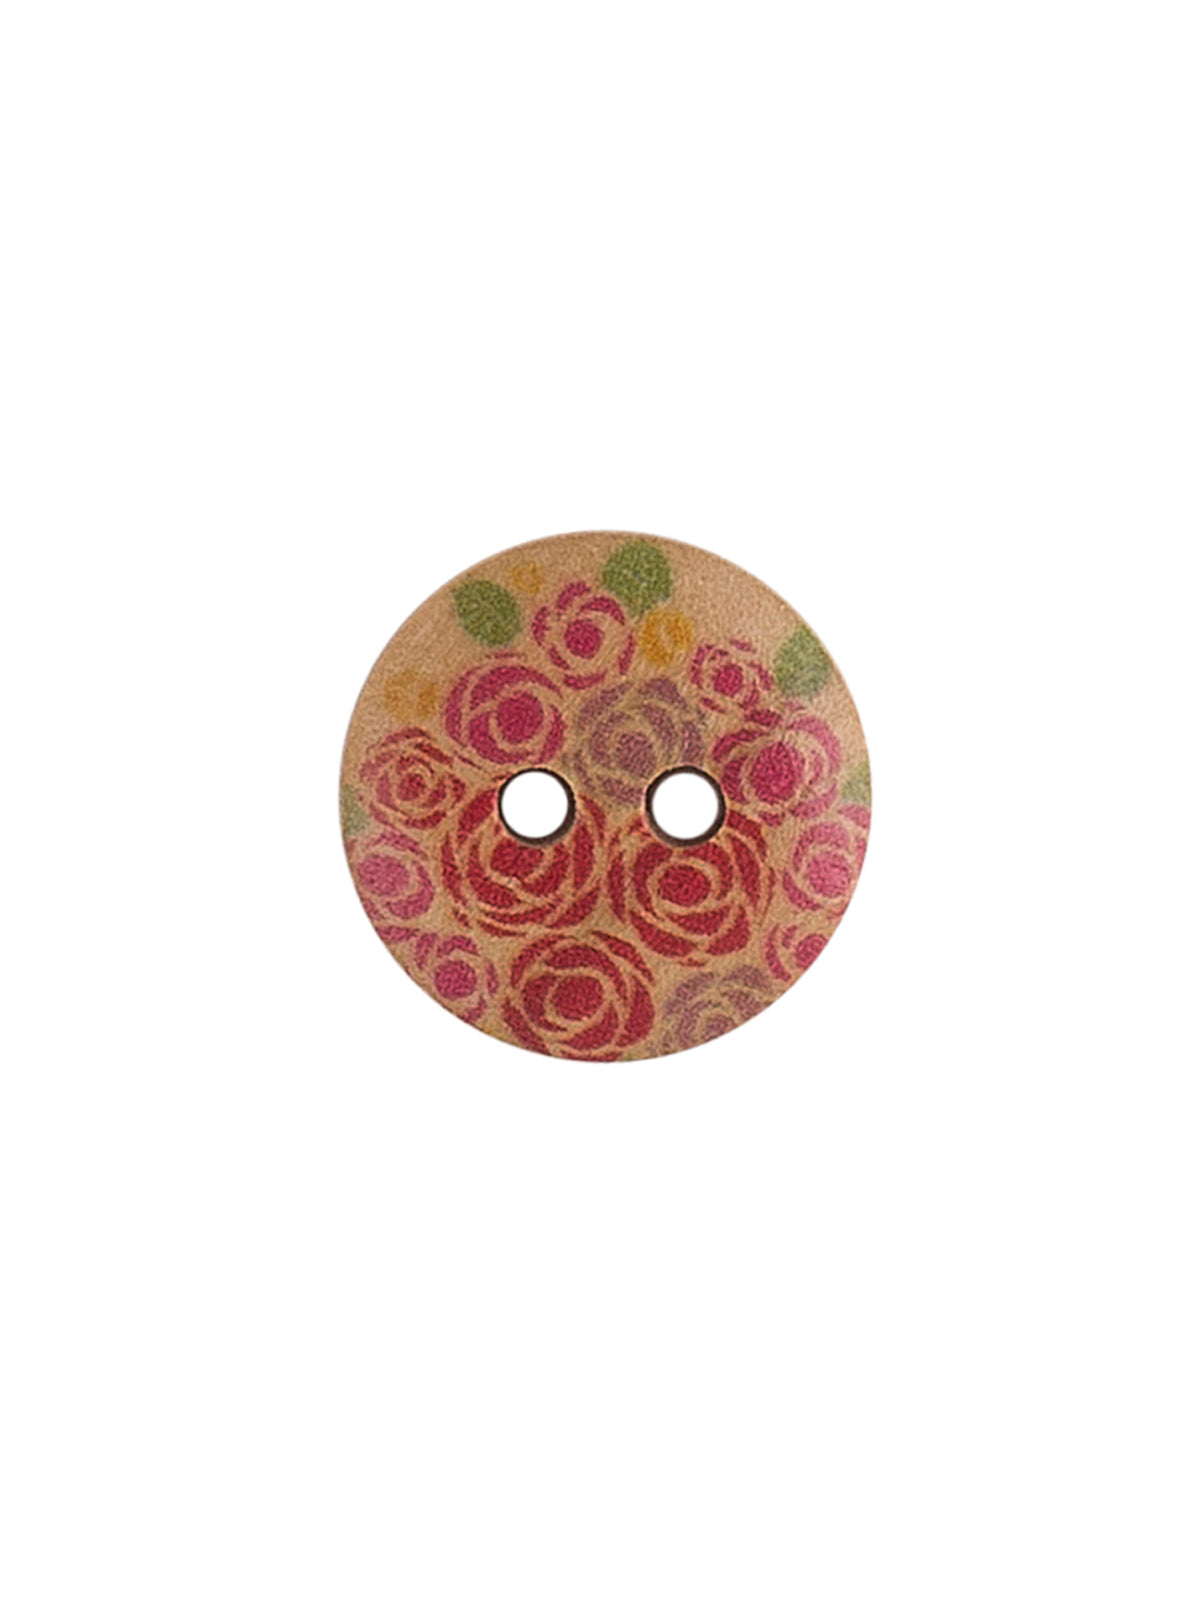 Rose Floral Printed Wooden Buttons for Kids Clothing